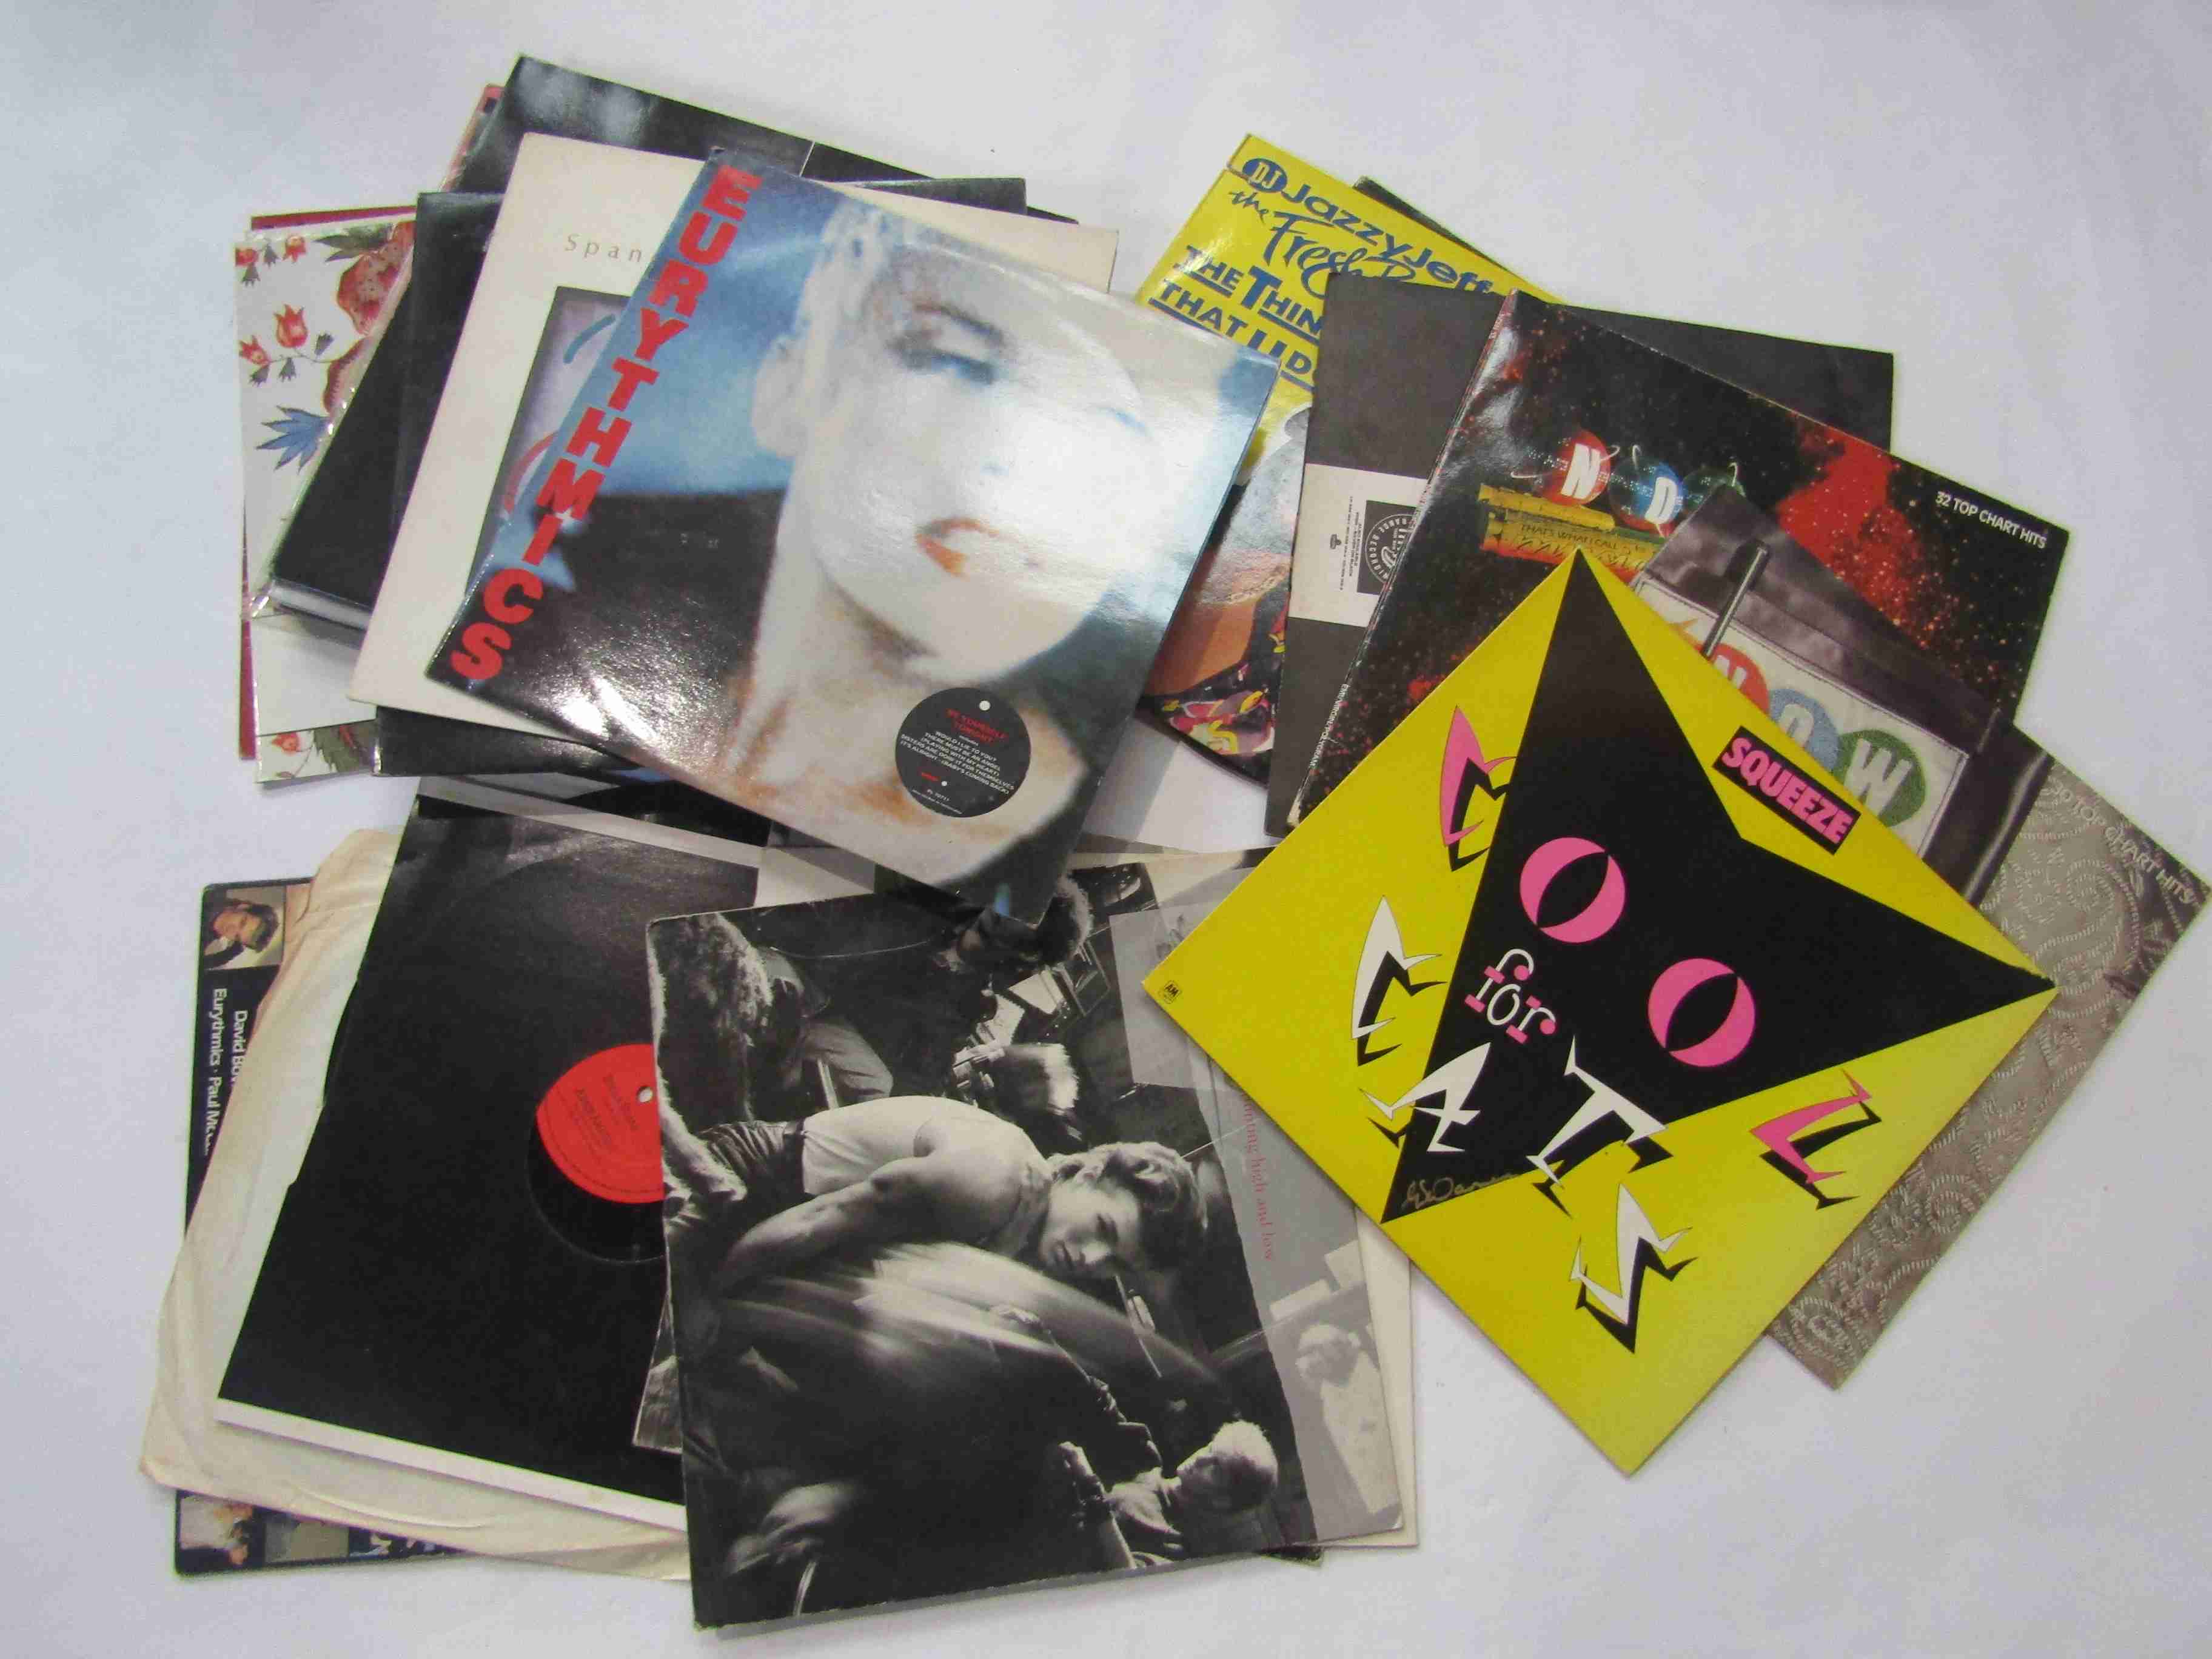 A collection of mostly 1980s LPs and 12" singles including 'Now' compilations, Eurythmics, UB40,